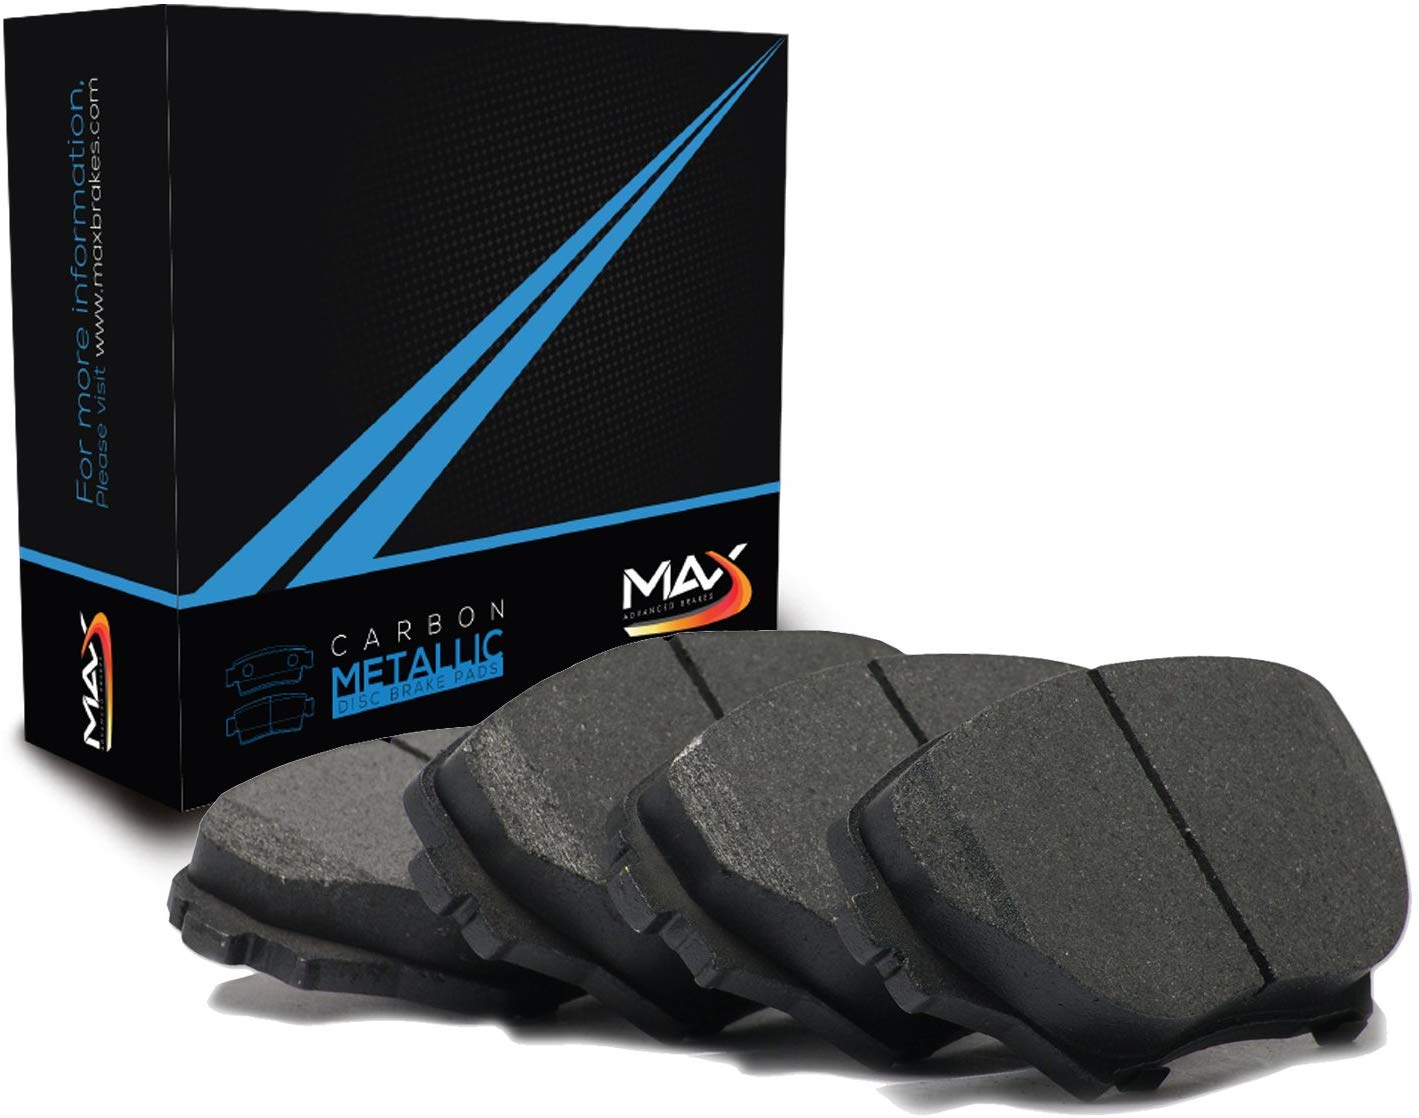 Max Brakes Front Carbon Metallic Performance Disc Brake Pads TA062051 | Fits: 2006 06 2007 07 2008 08 2009 09 2010 10 Ford Fusion